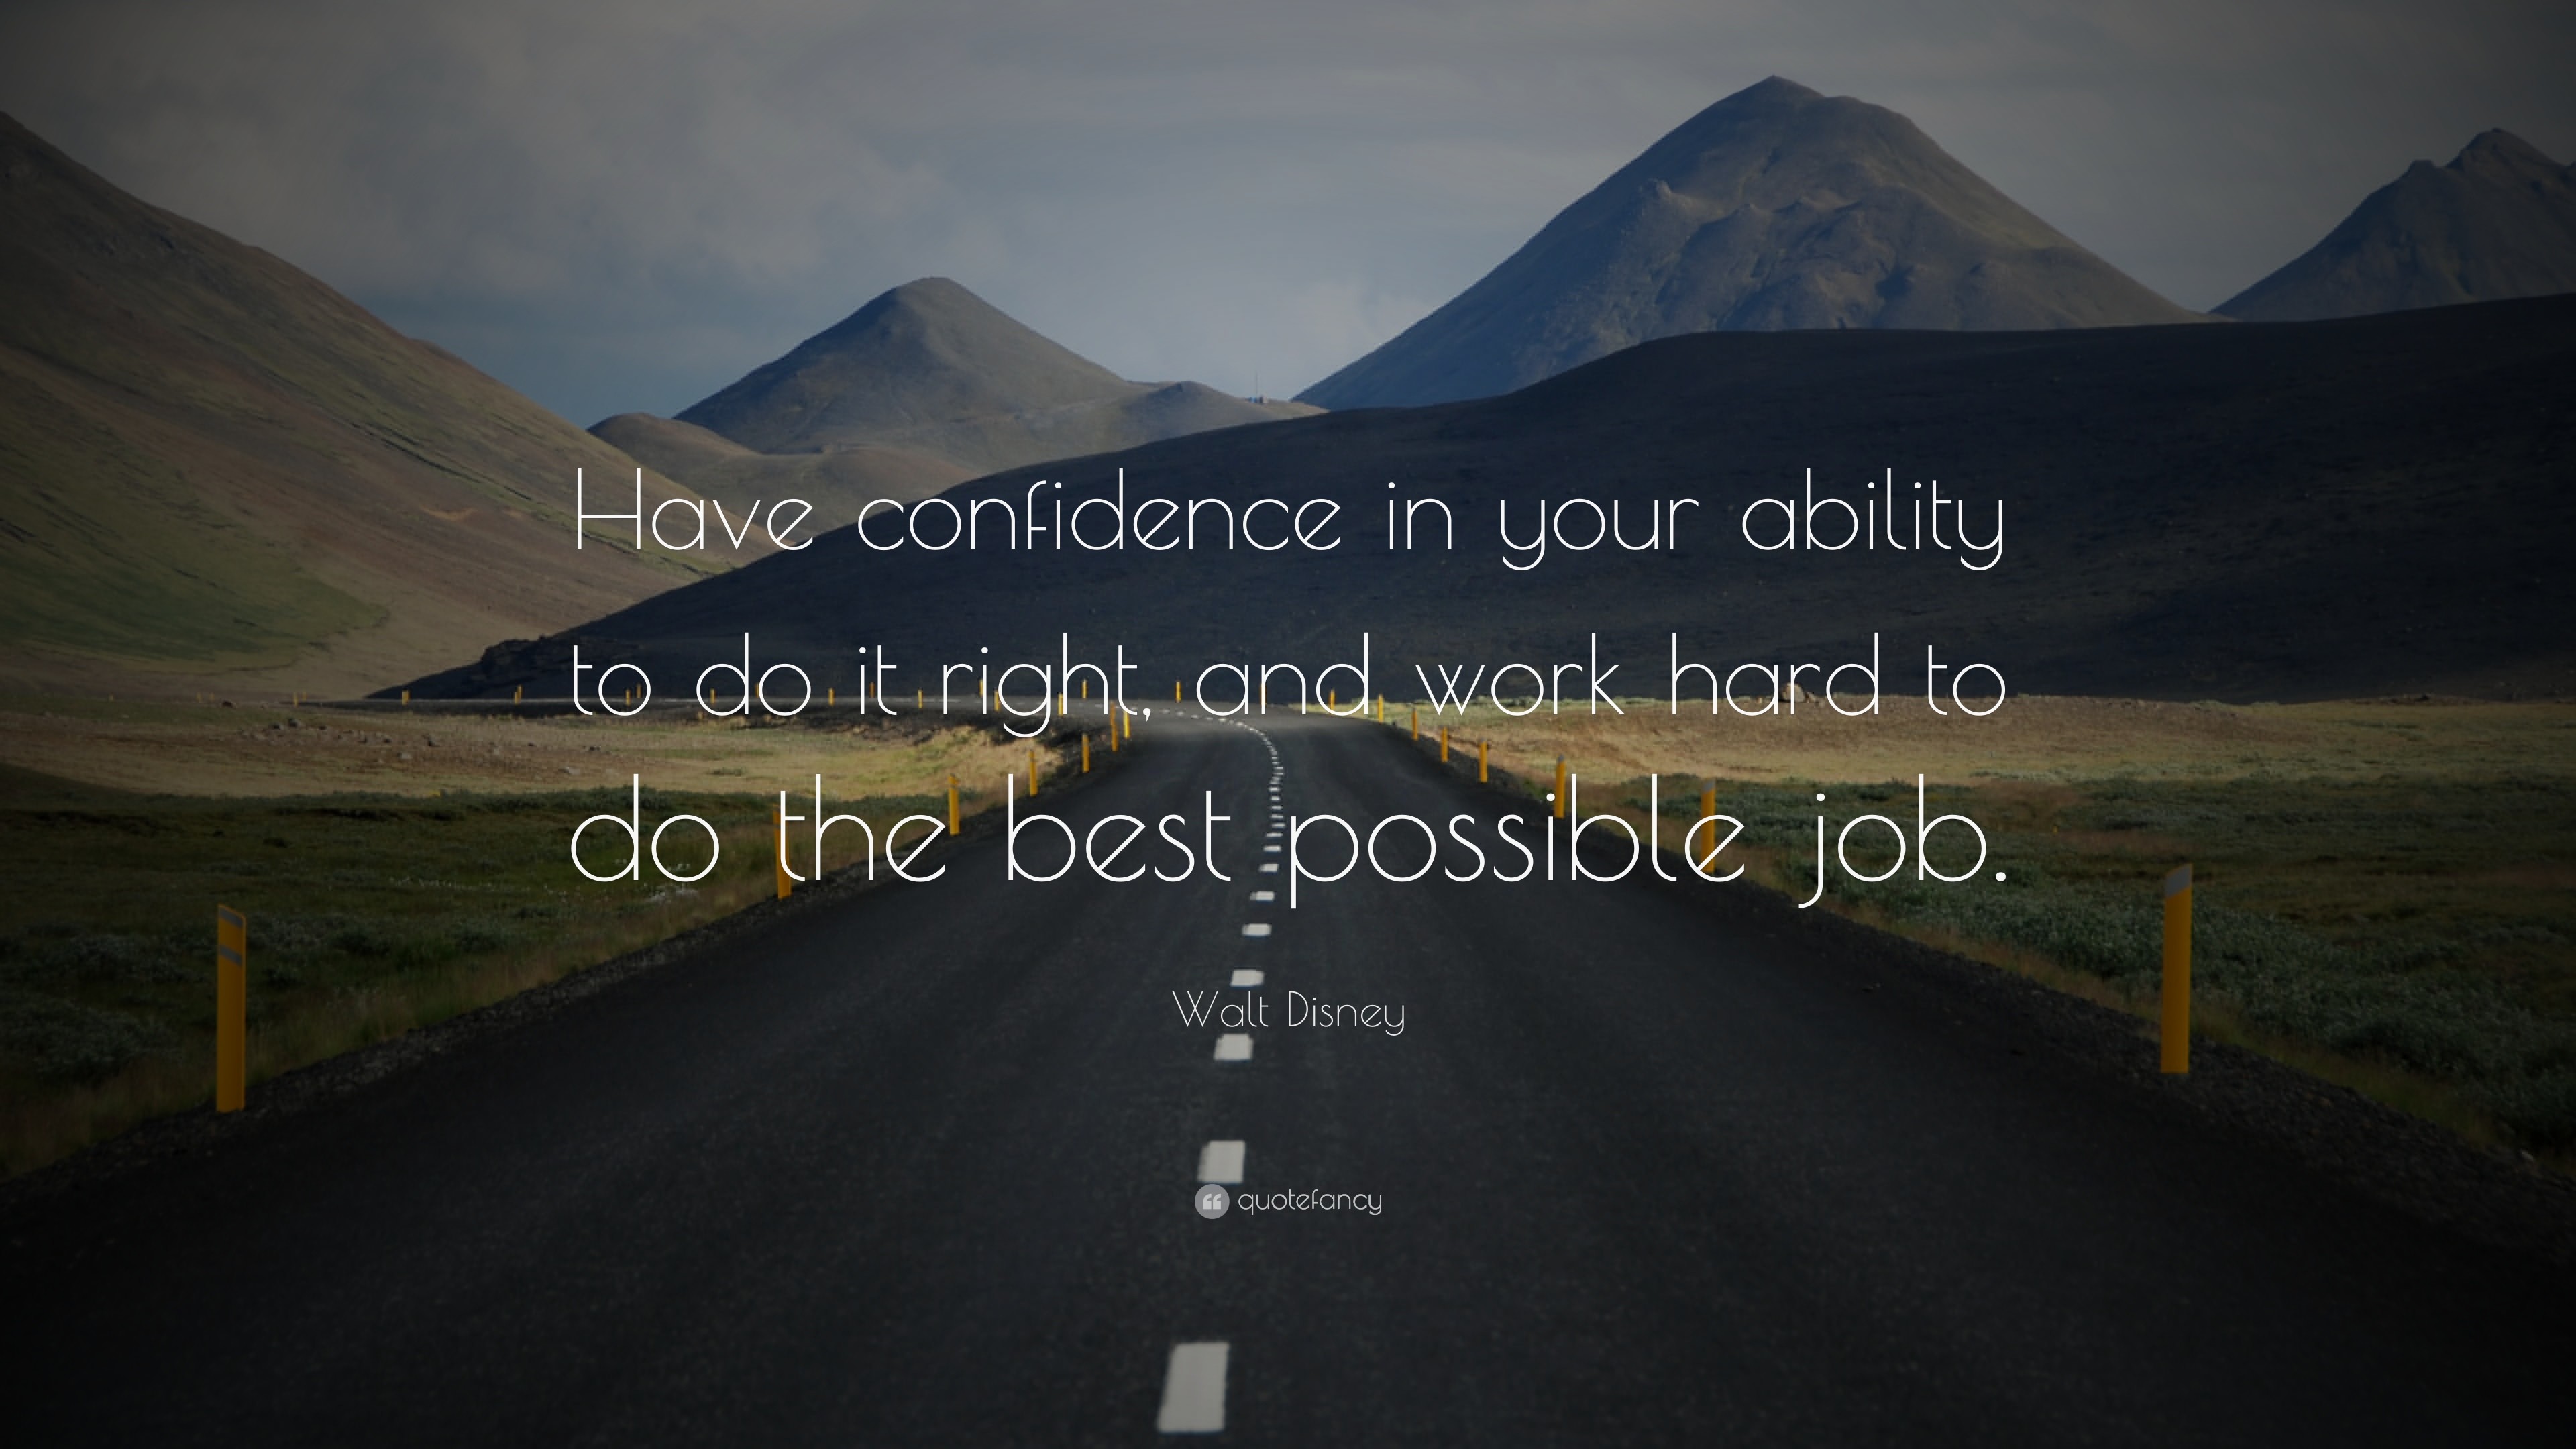 3840x2160 Hard Work Quotes: “Have confidence in your ability to do it right, and